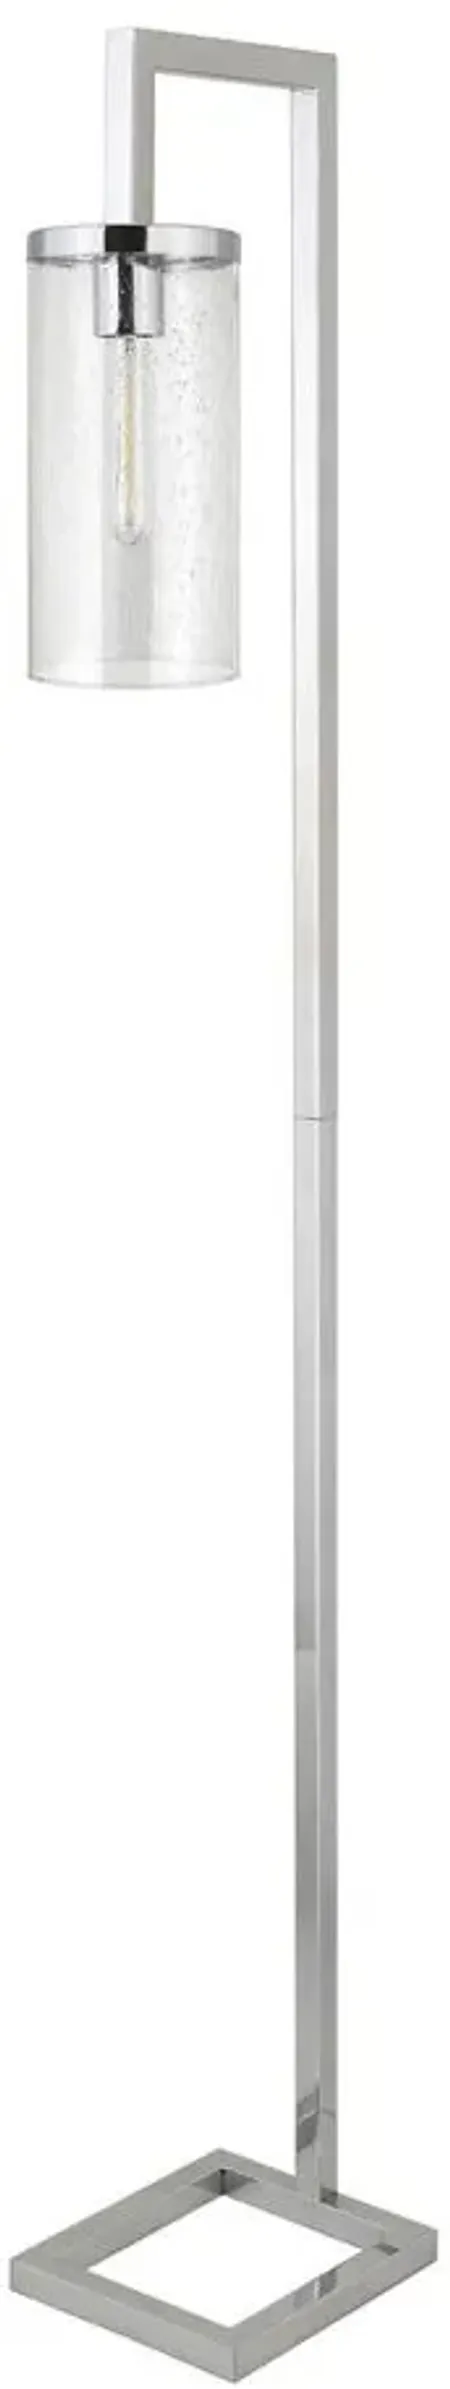 Ansa Seeded Glass Floor Lamp in Polished Nickel by Hudson & Canal